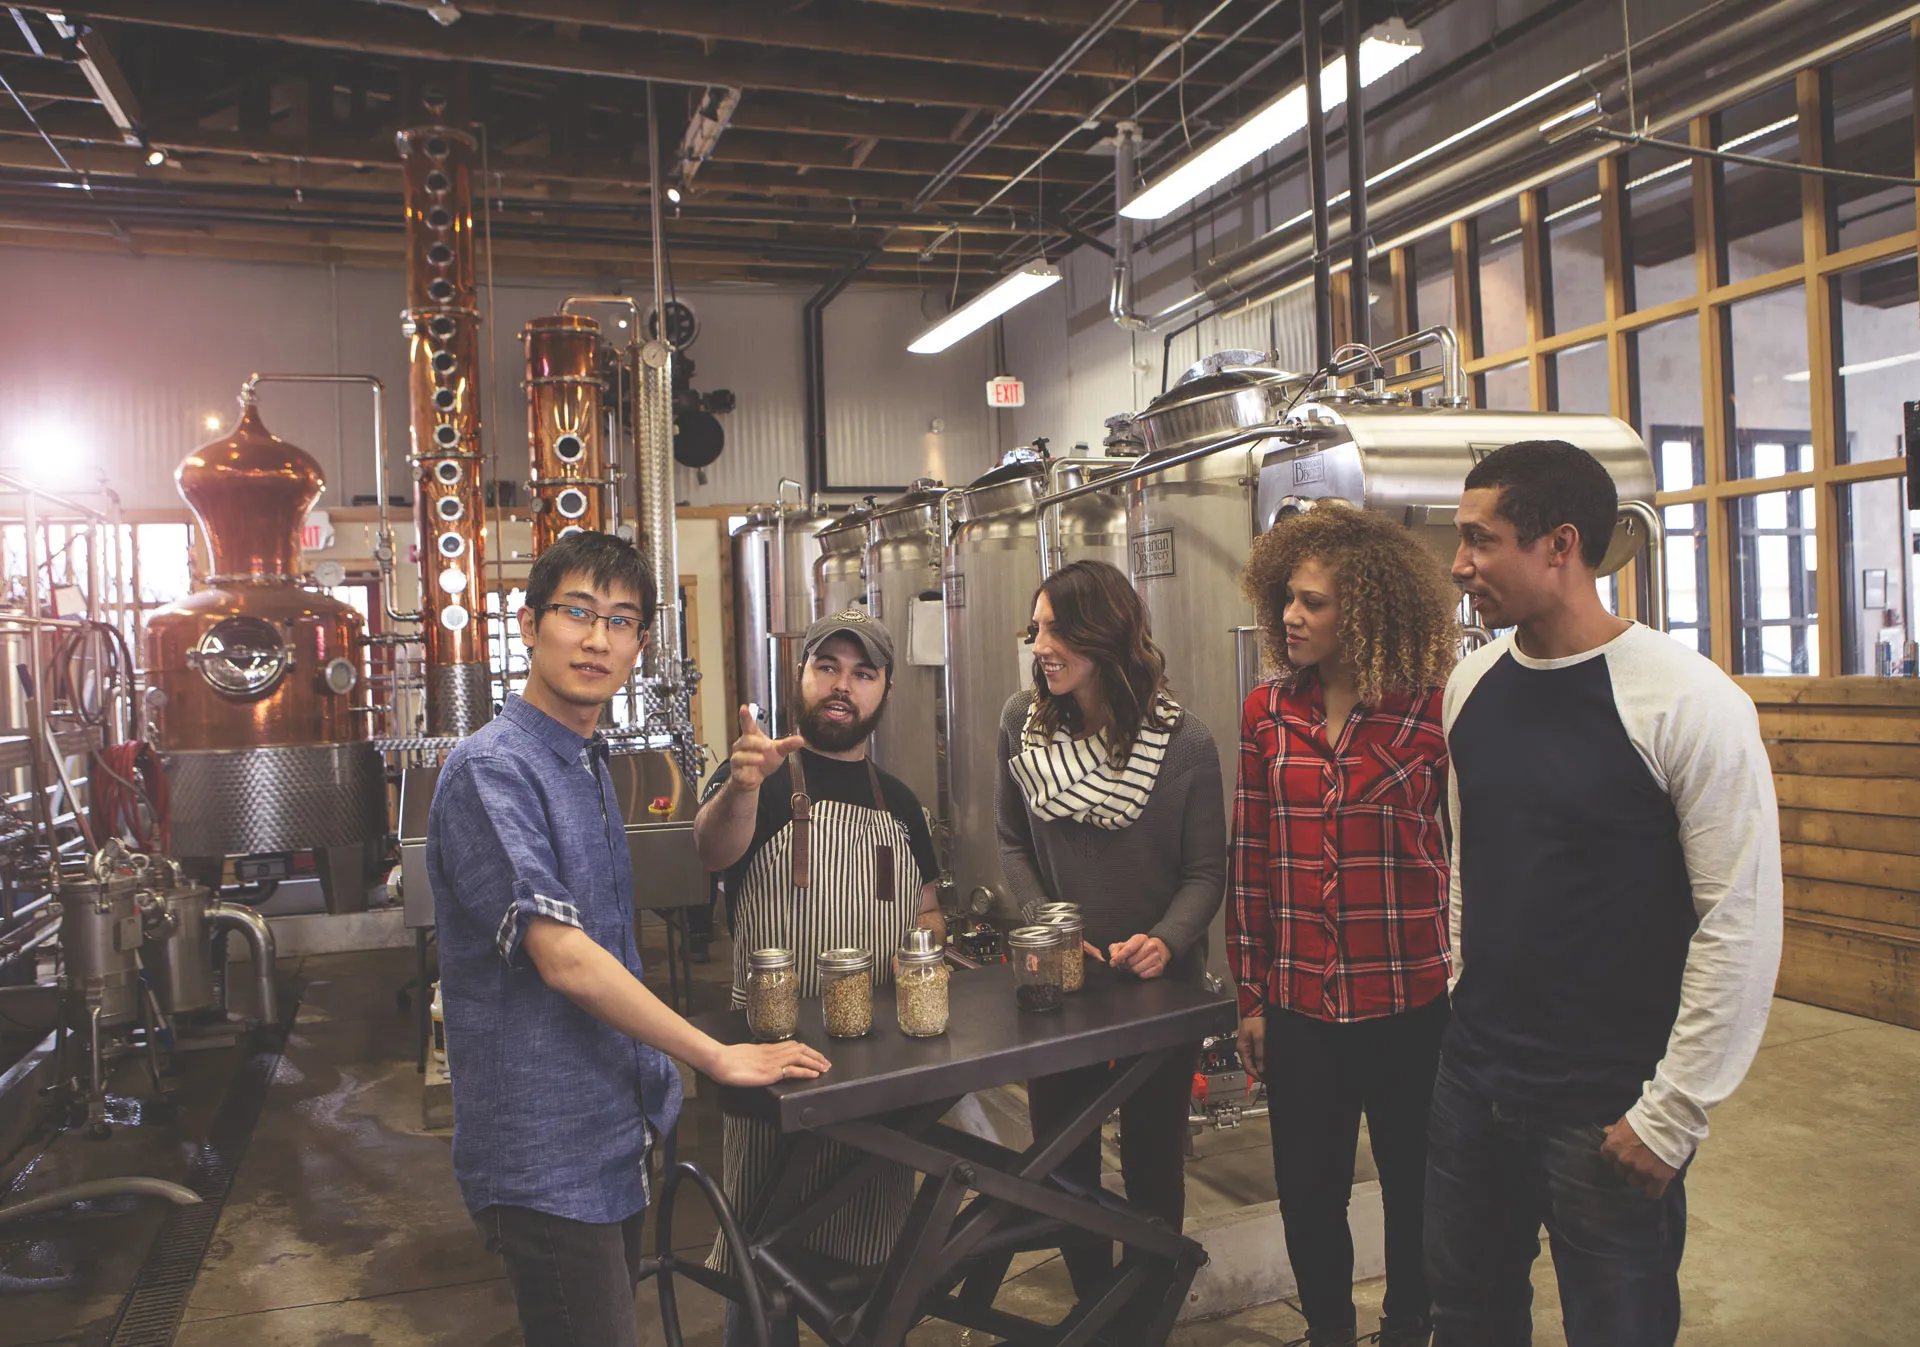 Take a tour at Eau Claire Distillery (Photo credit: Travel Alberta/Roth & Ramberg)